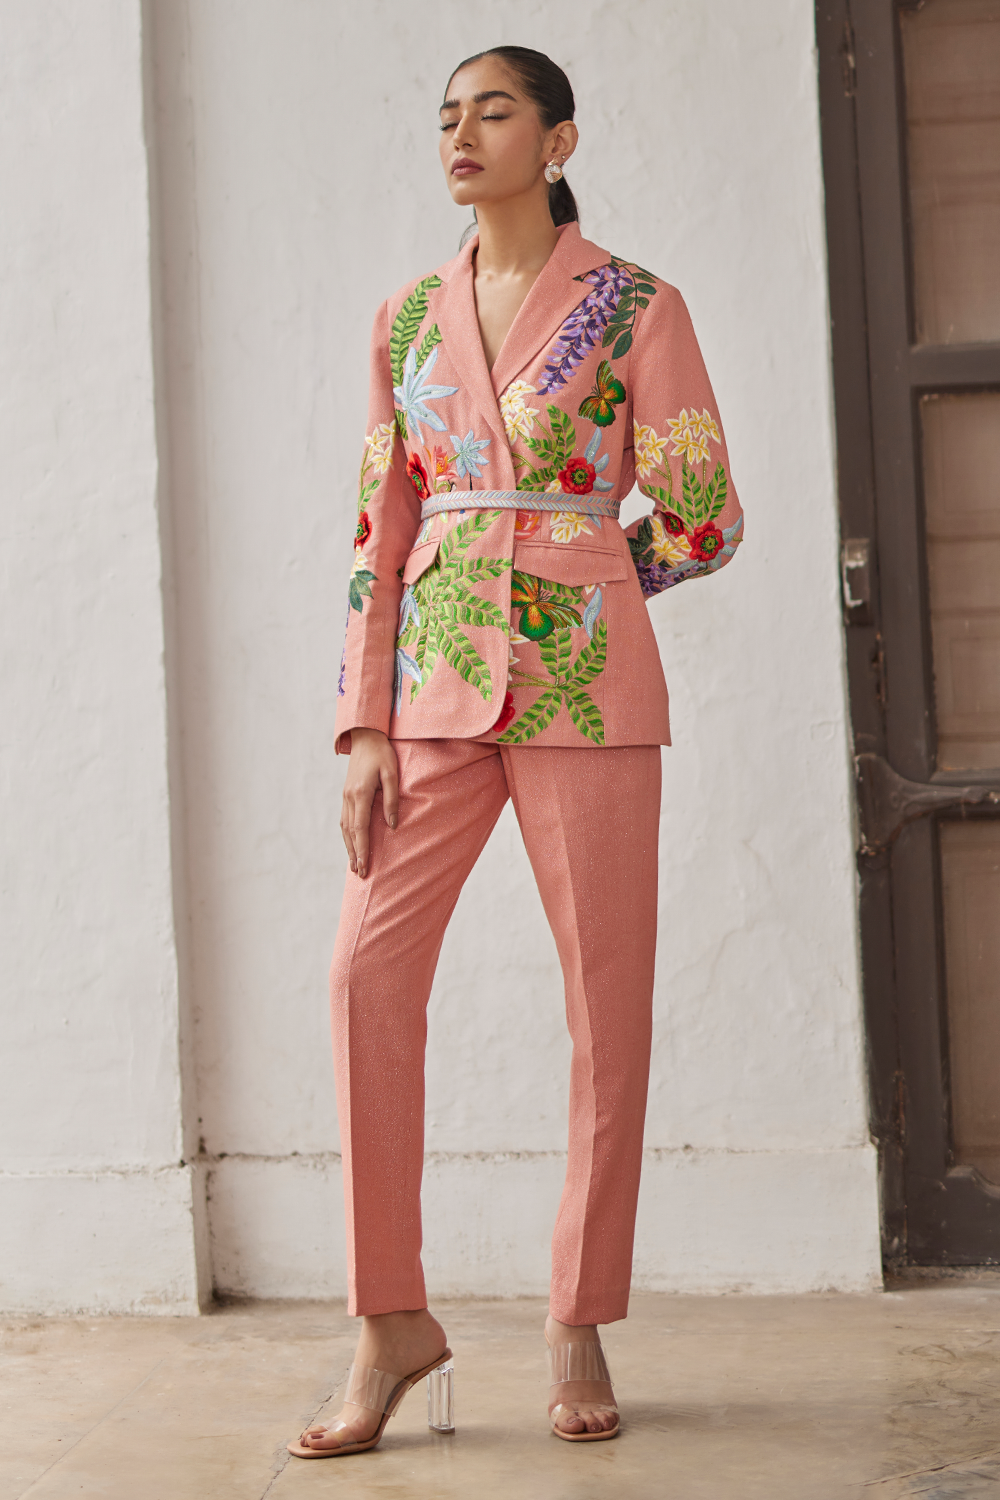 Peach Peony Embroidered Jacket and Narrow Pants